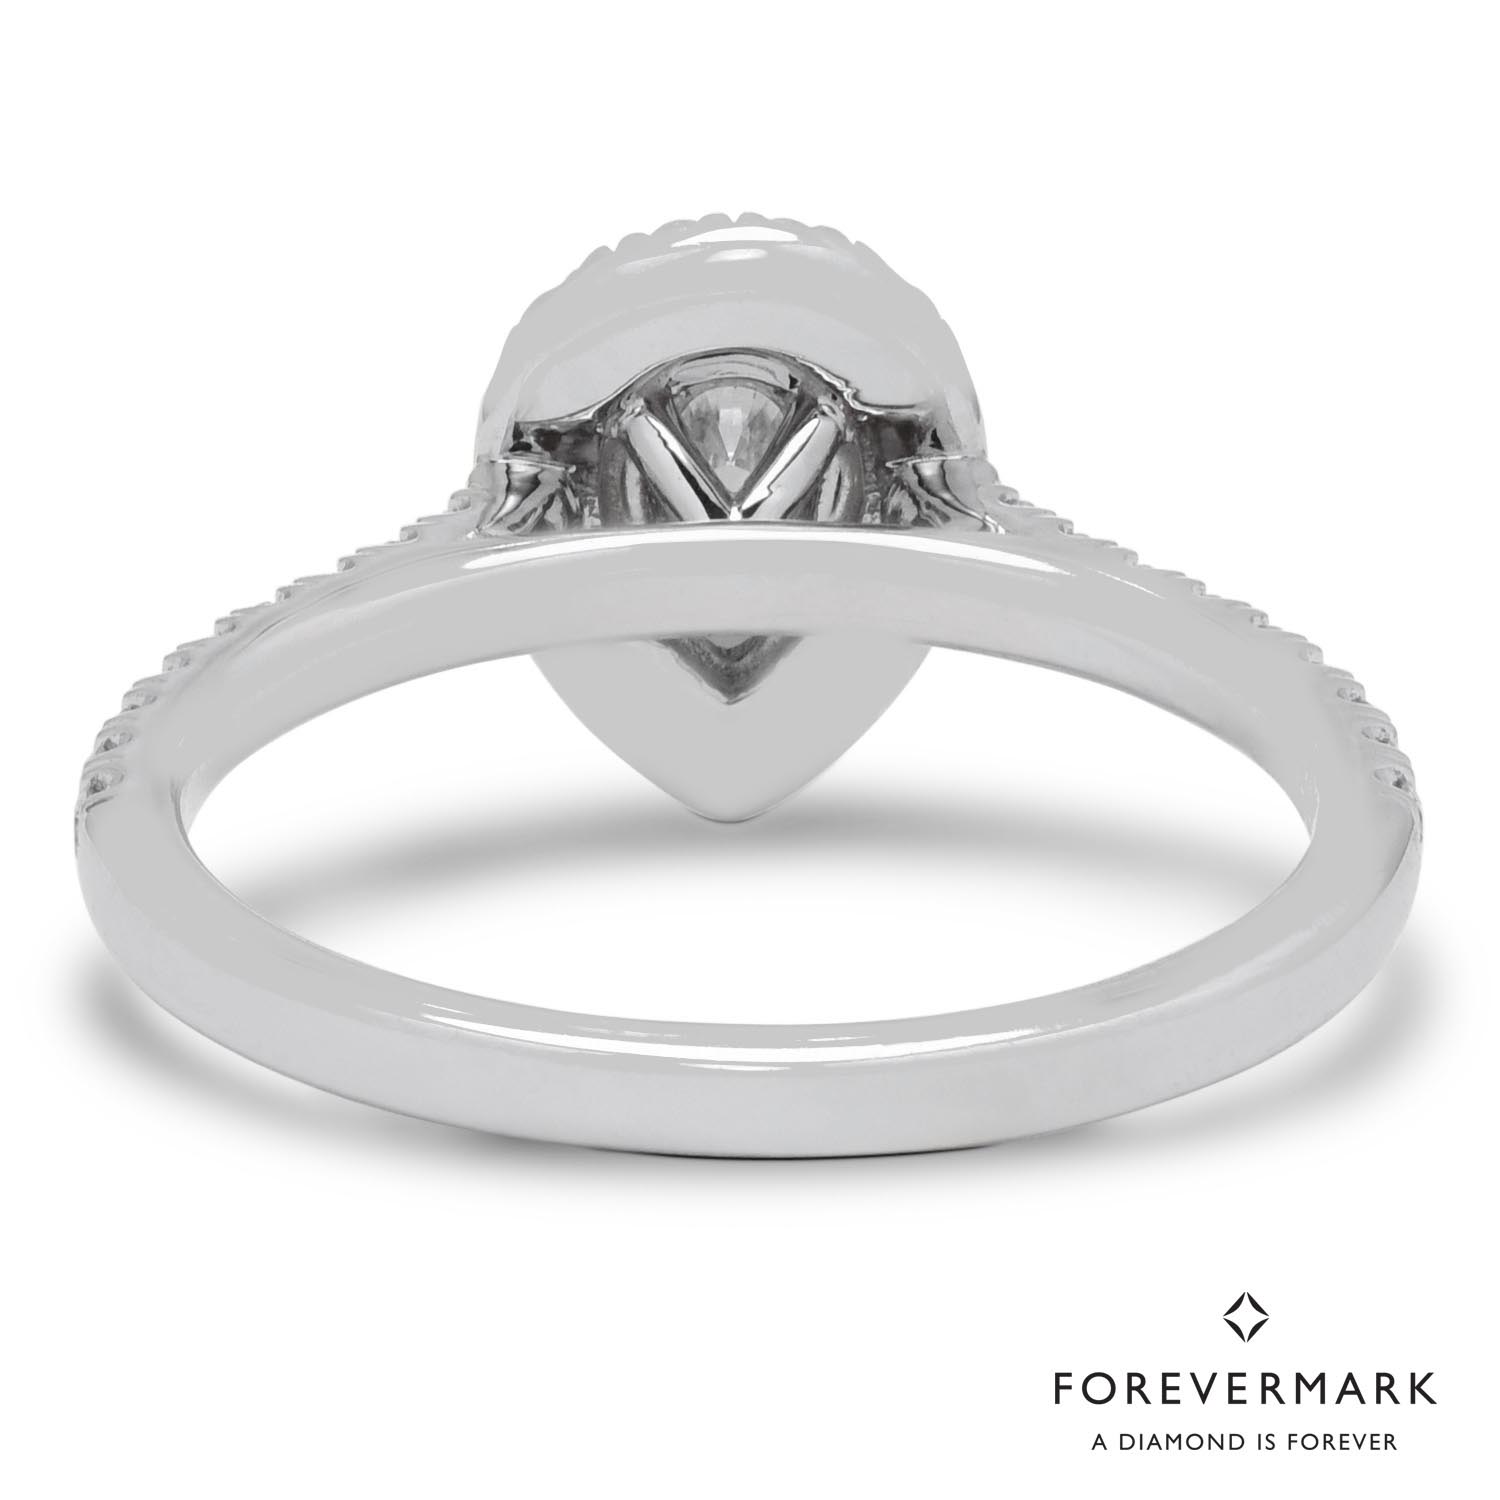 De Beers Forevermark Center of My Universe Pear Diamond Halo Ring with Forevermark Petite Diamonds in 18kt White Gold (3/4ct tw)